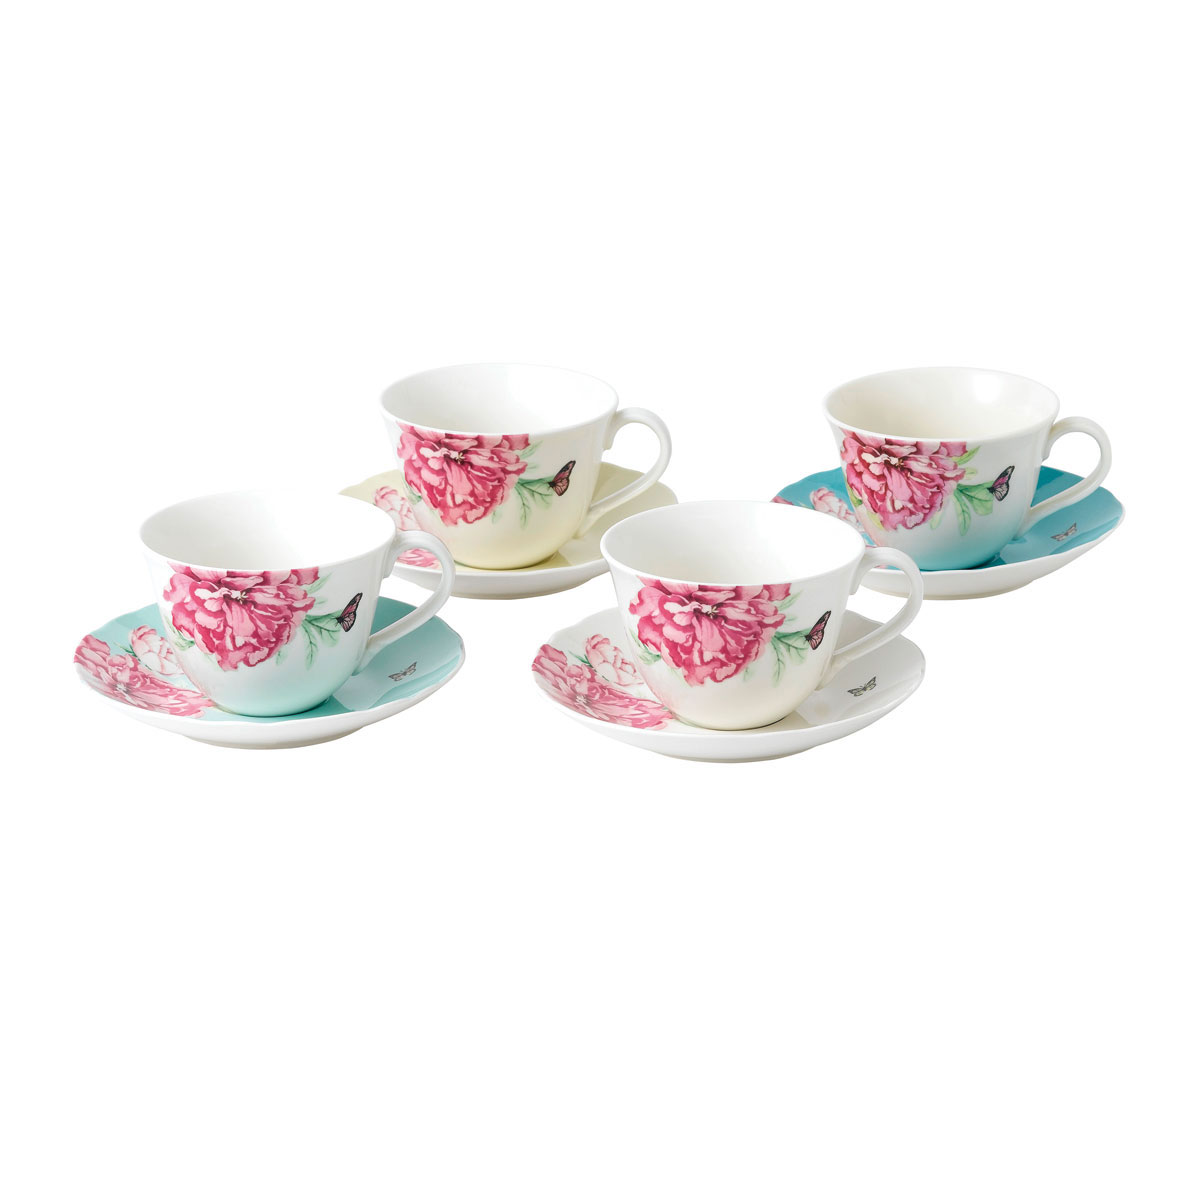 Royal Albert Everyday Friendship Teacup and Saucer Set Of 4